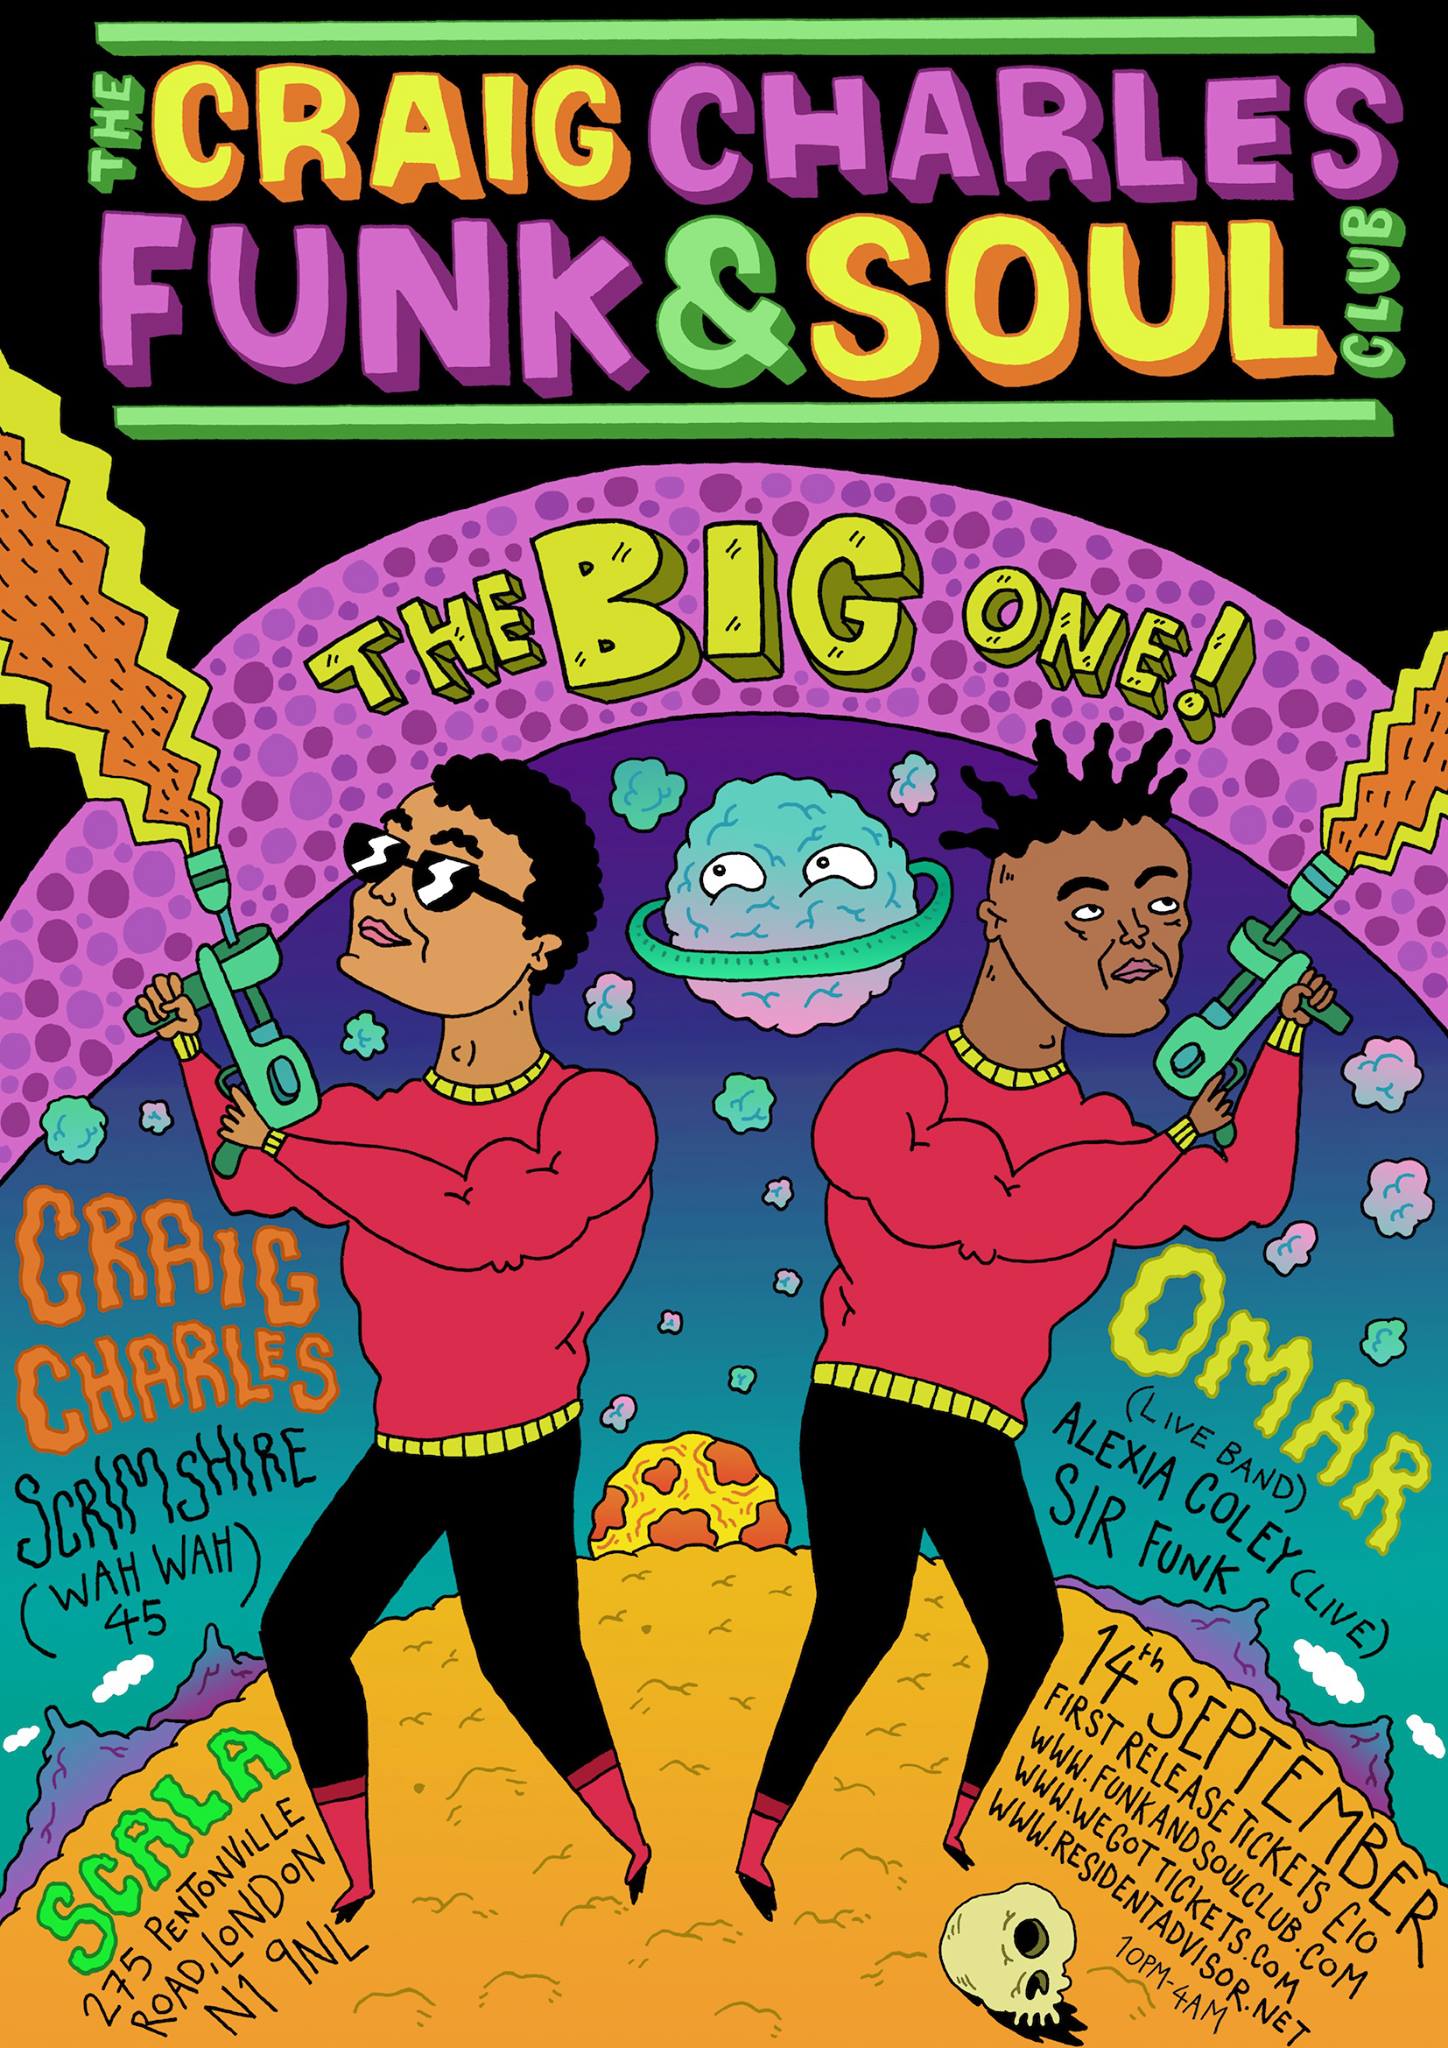 Craig and Funk and Soul